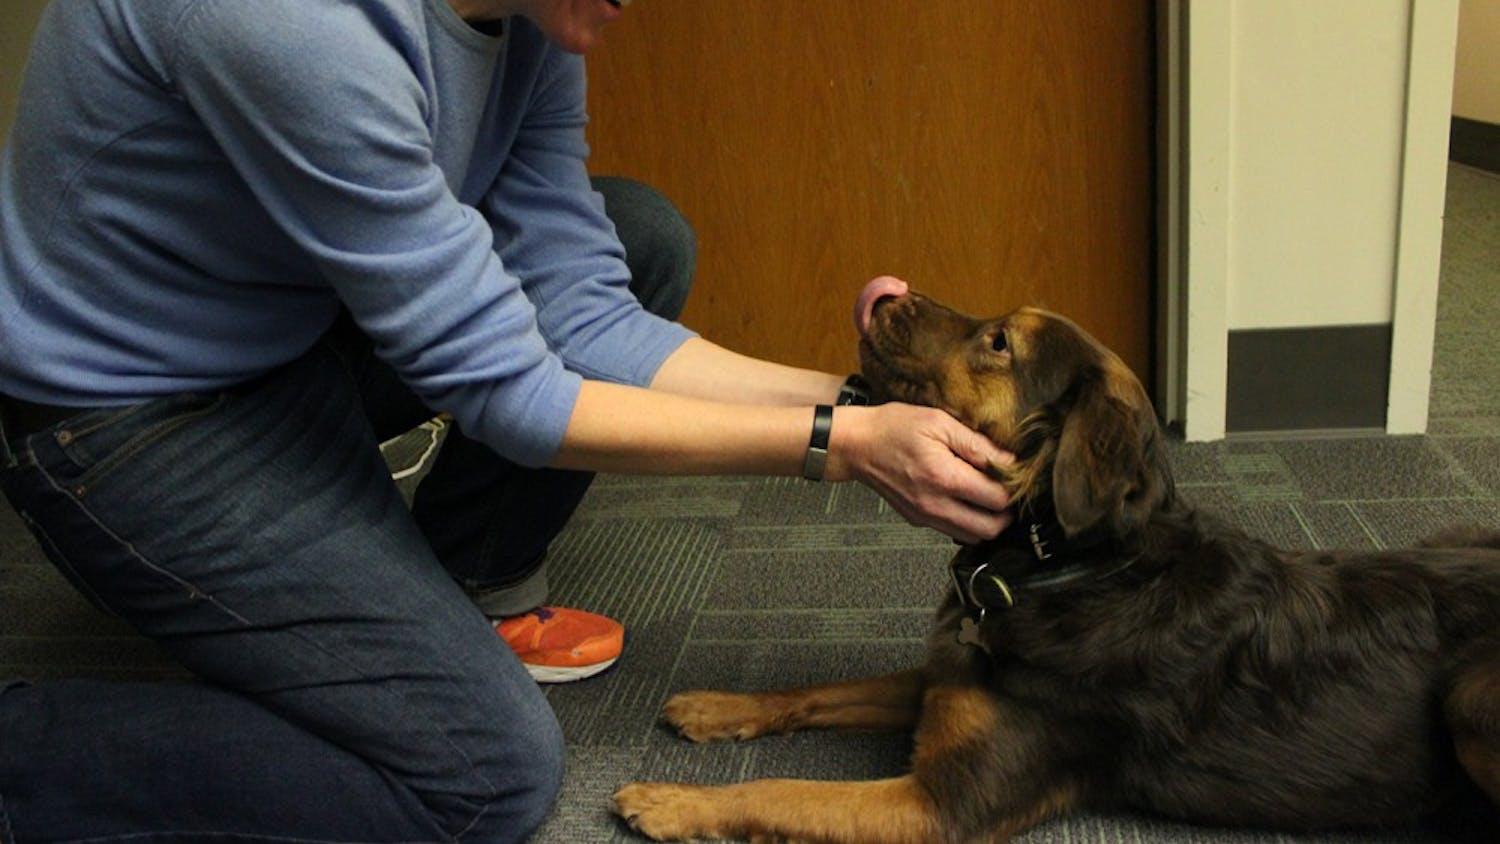 Maya is the newest member of the CAPS therapy team. Her owner, therapist Avery Cook, has started providing sessions to clients that utilize the nearly one-year-old pooch as a therapy dog.